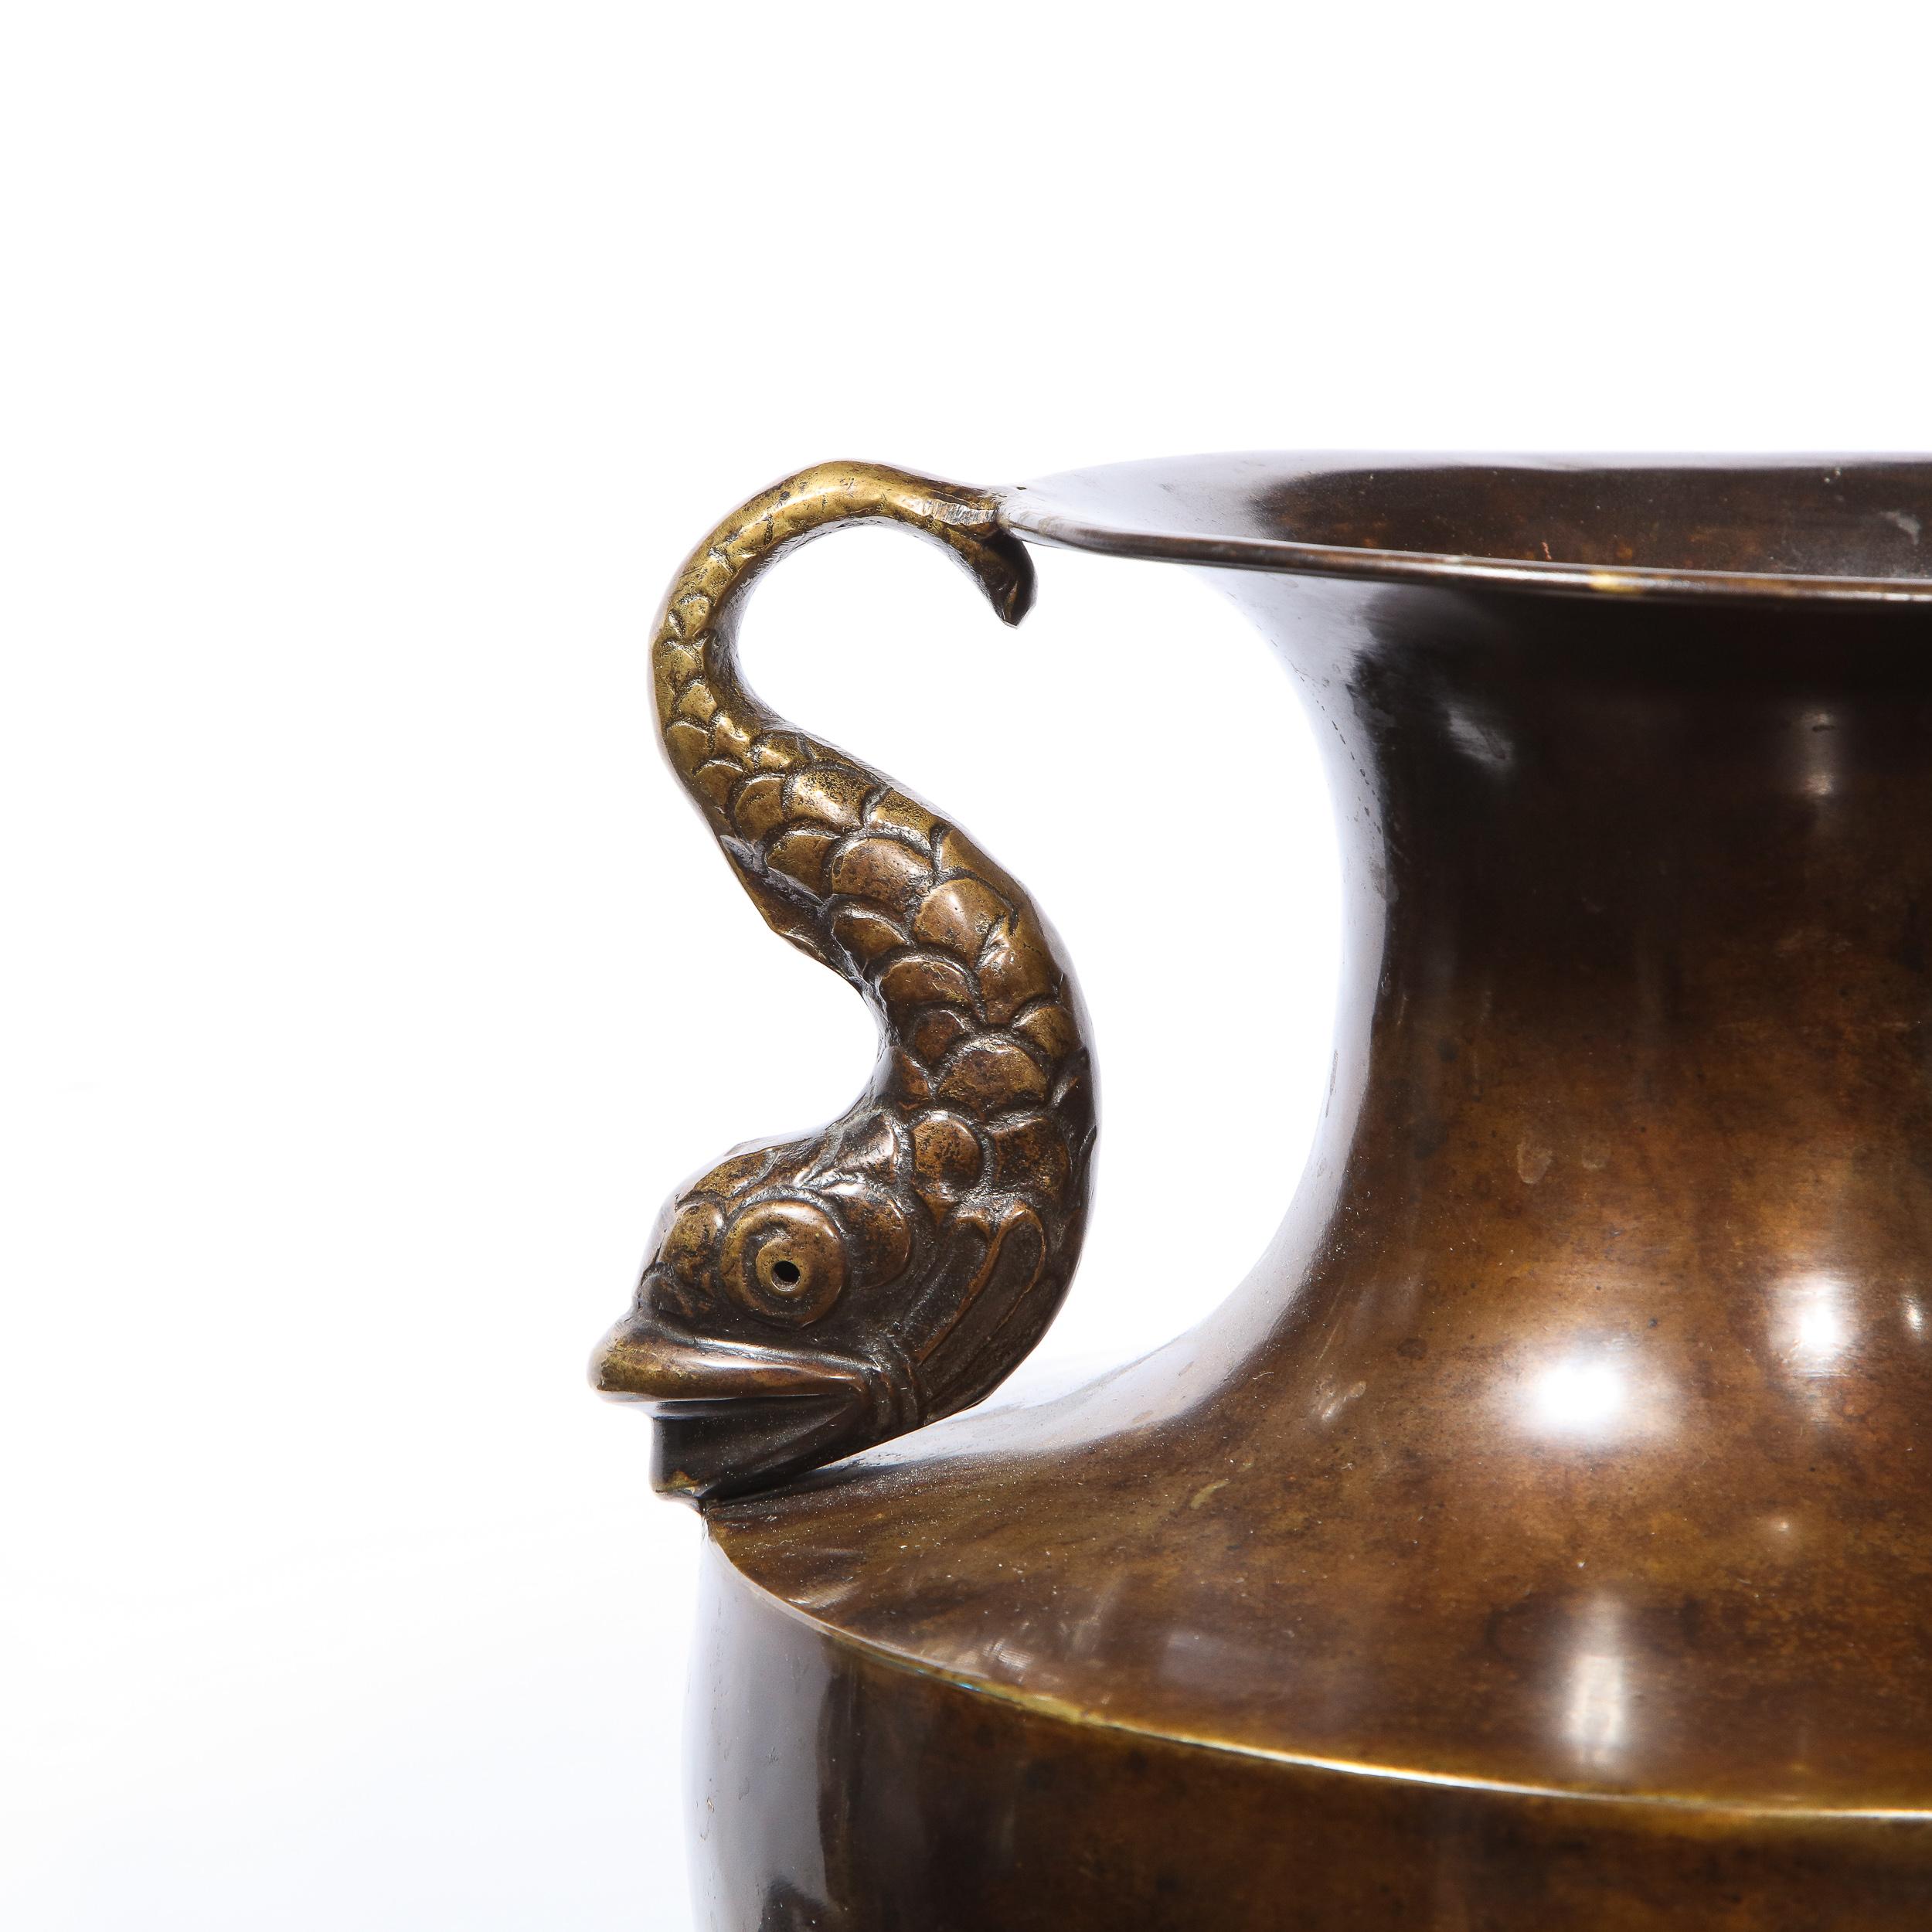 This elegant and graphic 19th century classical vase was realized in Swededn. It features a square base that ascends into an undulating fillet and an urn form body with a cylindrical neck and flared mouth- all in beautiful bronze. The piece offers